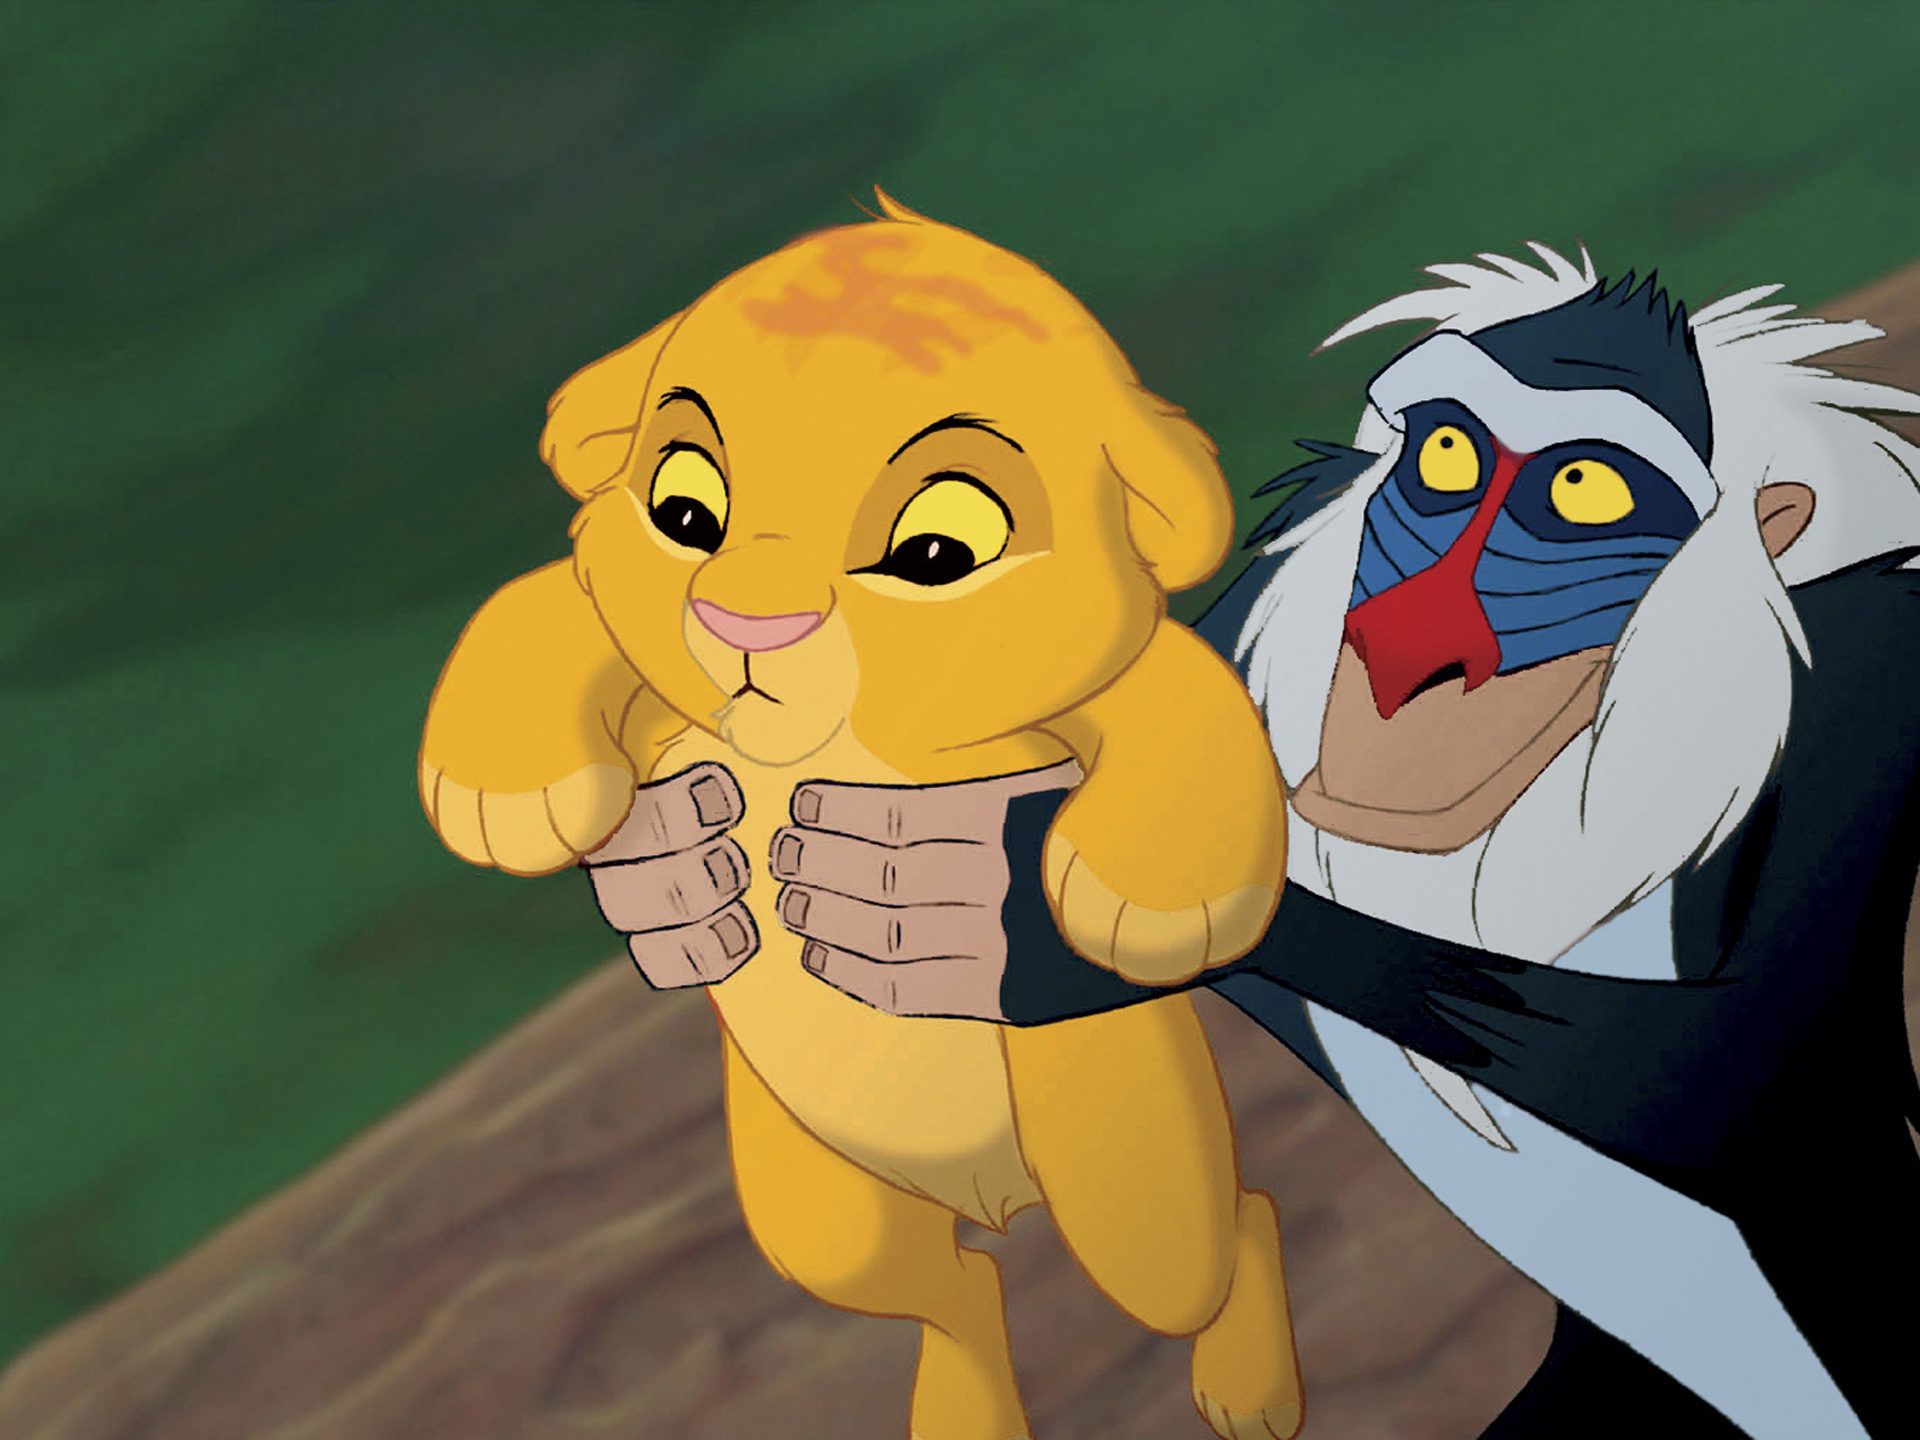 Simba And Rafiki In The the Lion King. : Wallpaper13.com